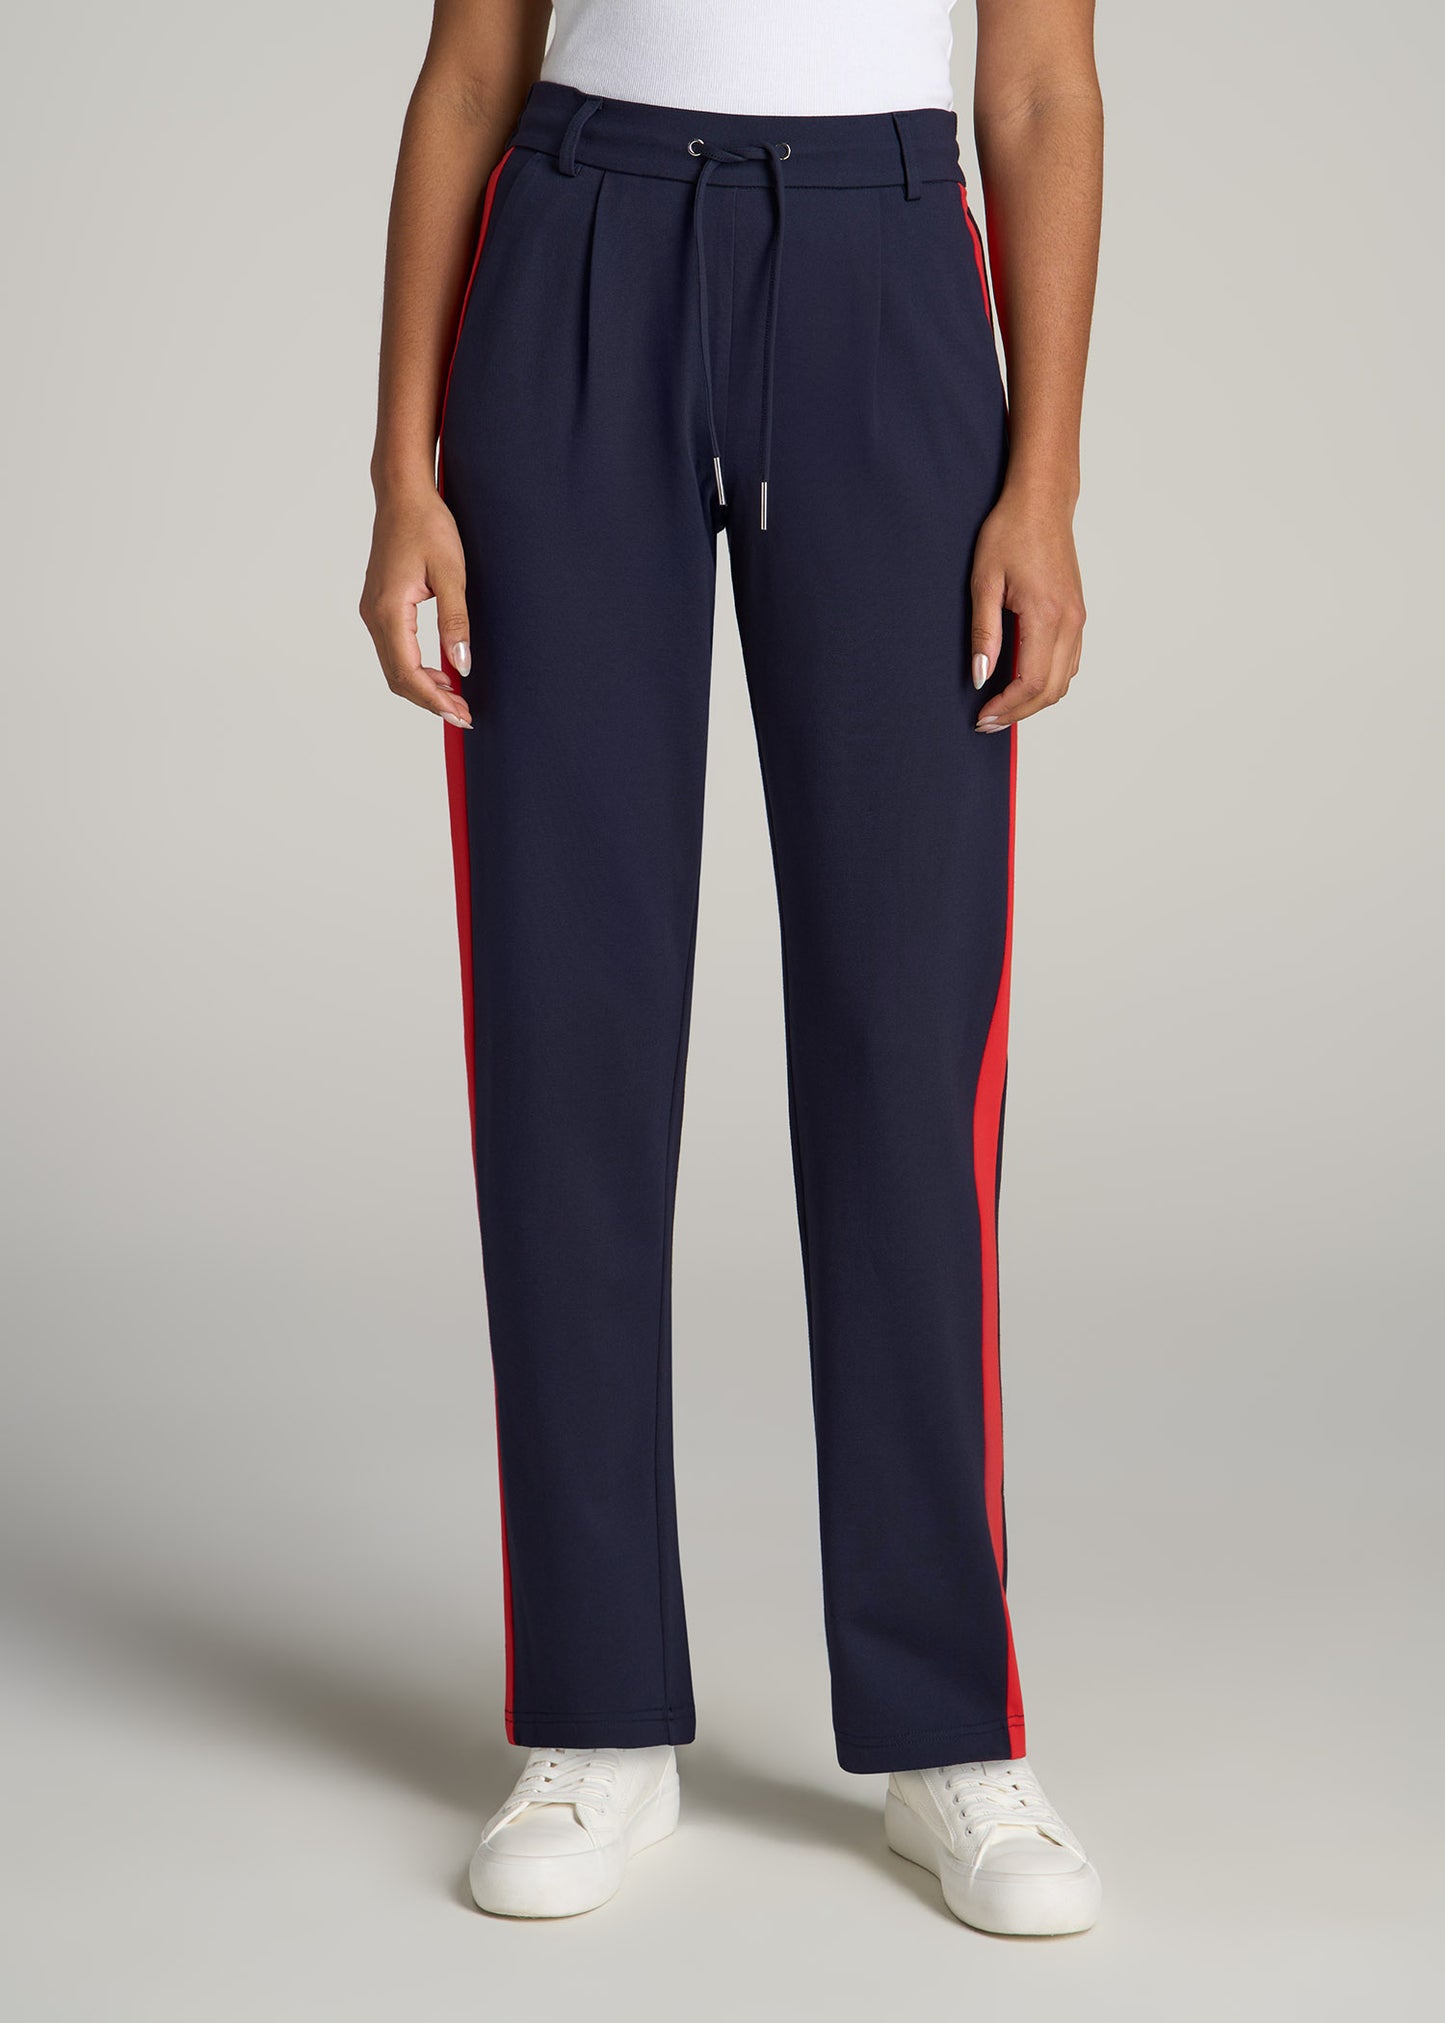 Pull On Tuxedo Stripe Pants for Tall Women in True Navy and Radiant Red